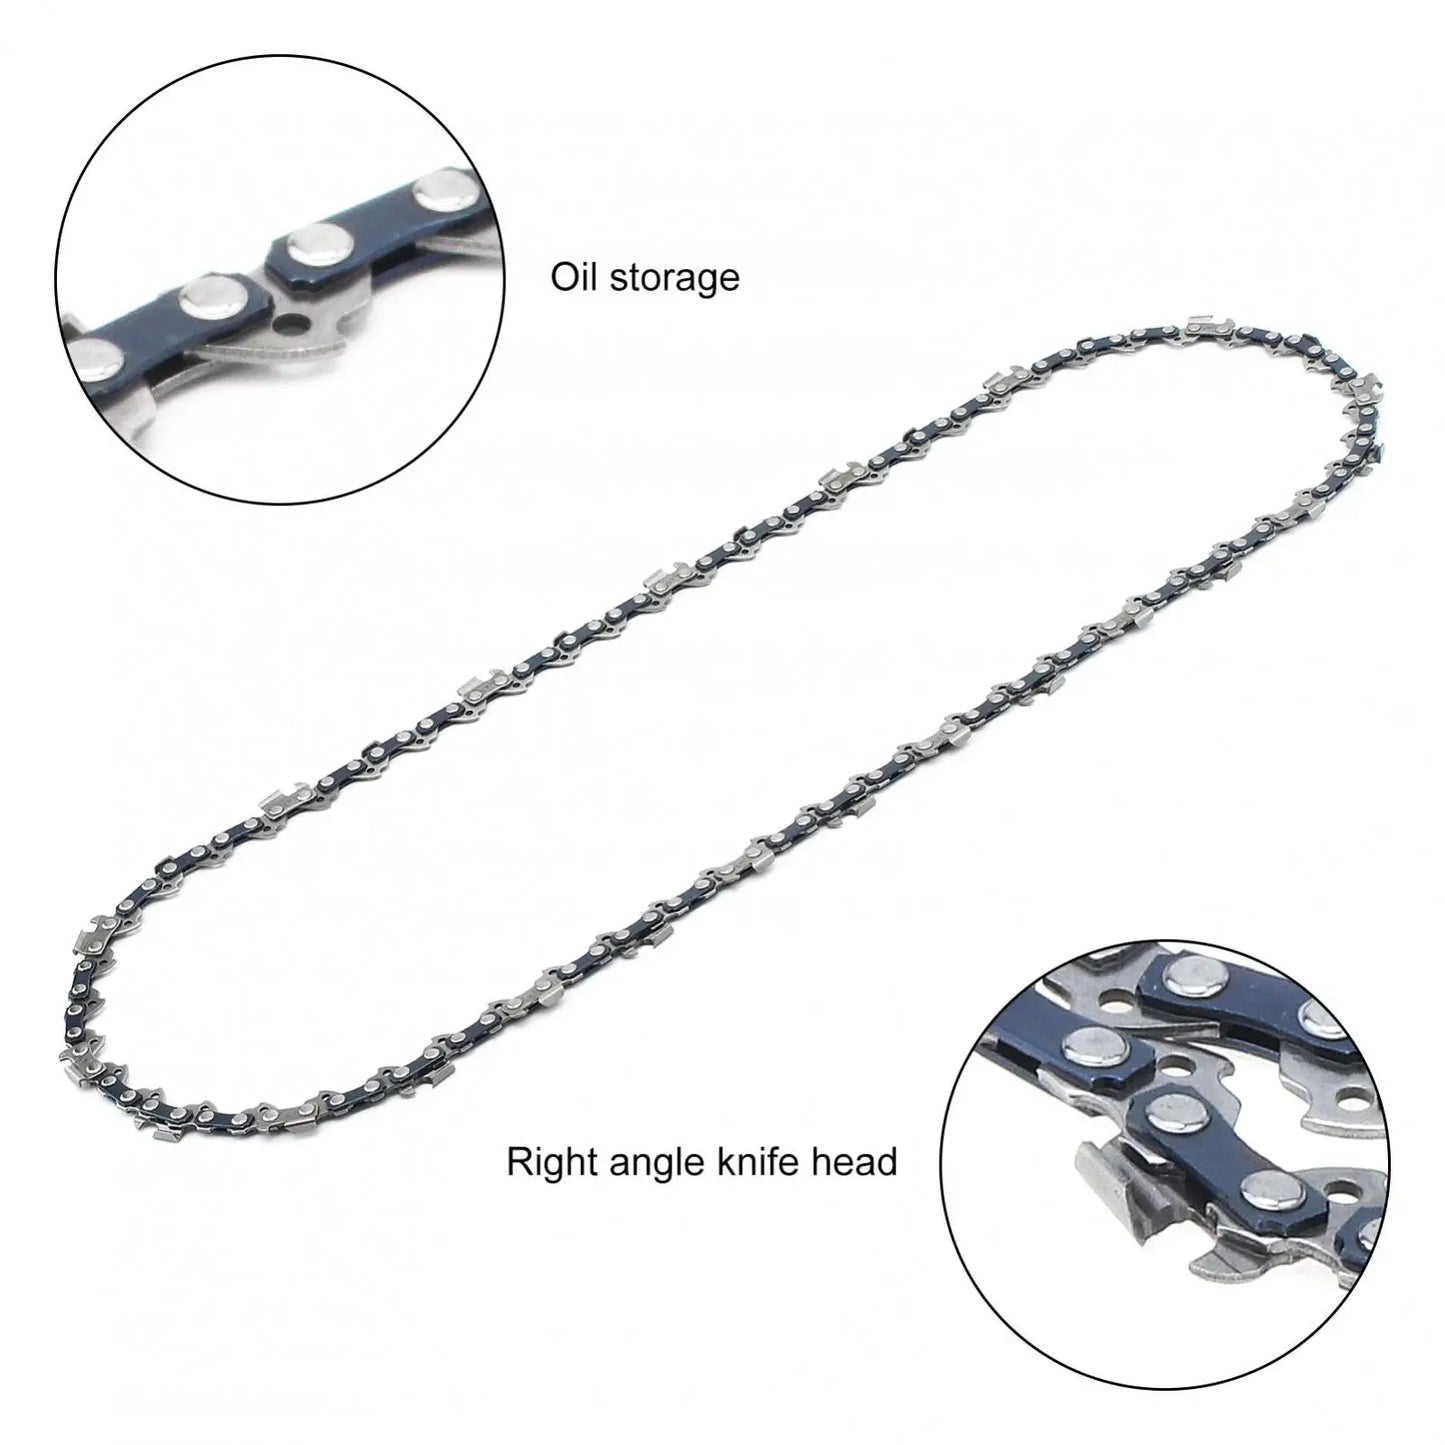 16-Inch Carbon Steel Chainsaw Chain Replacement Cordless Handheld Electric Chainsaw